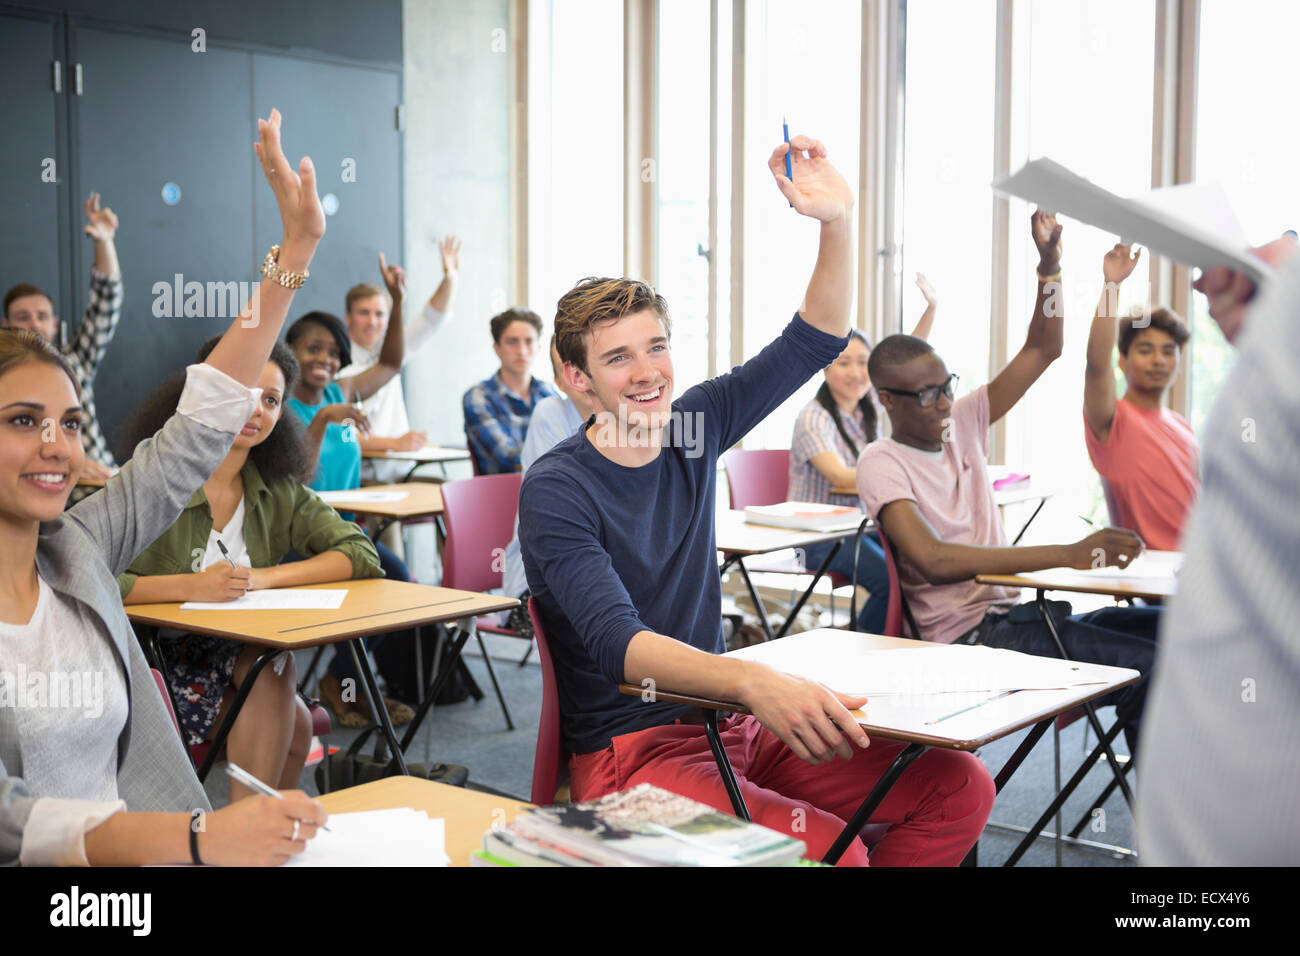 View of smiling students sitting at desks in classroom with arms raised Stock Photo